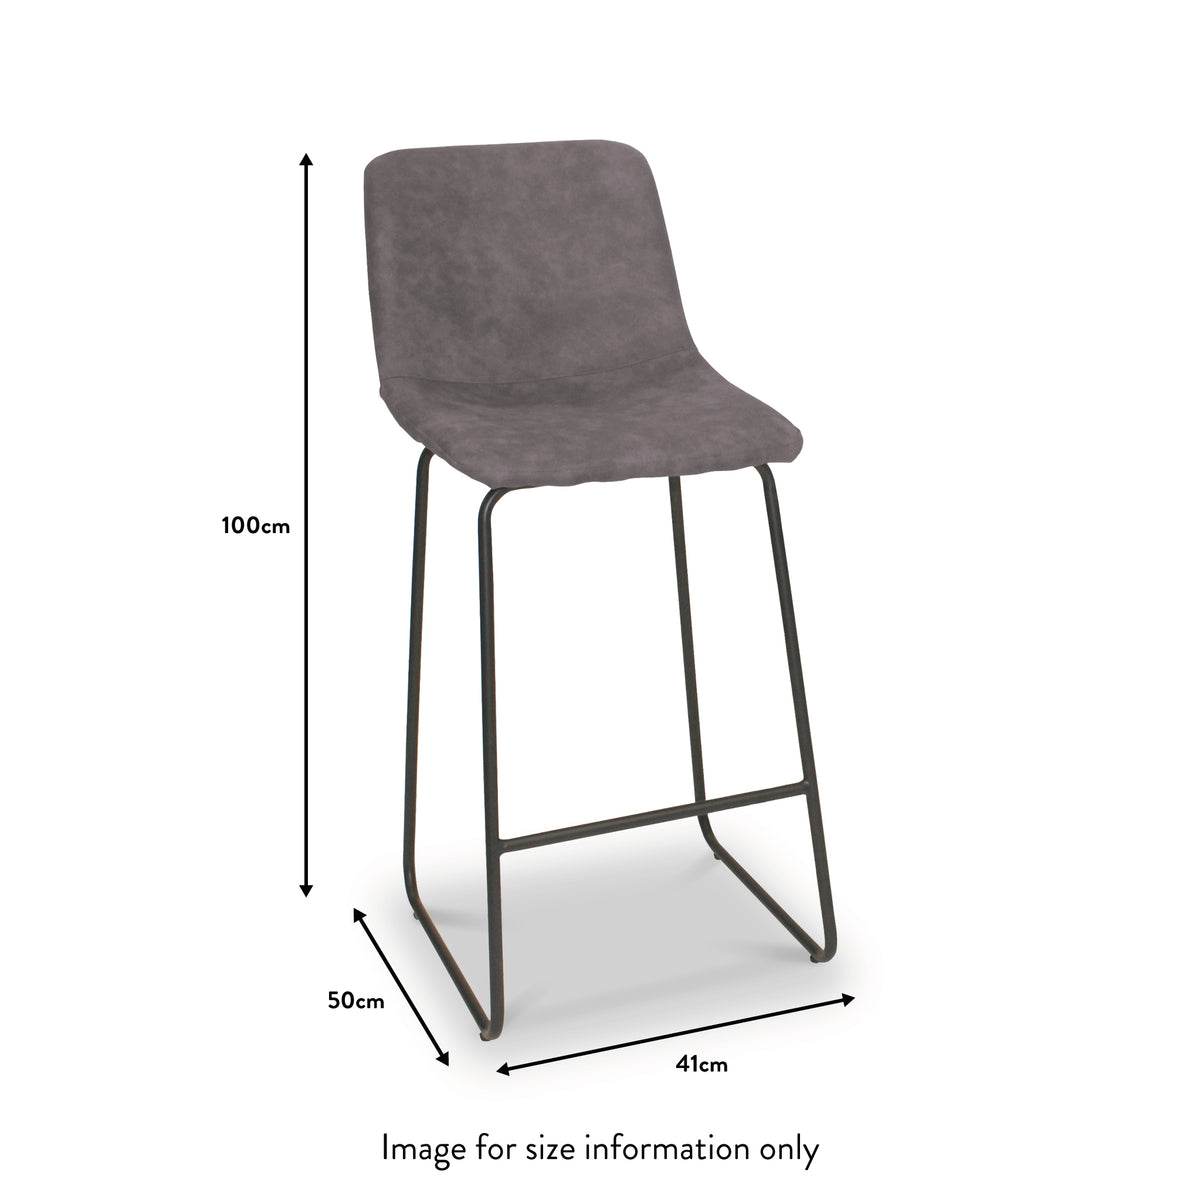 Maren Light Grey Faux Leather Bar Stool dimensions